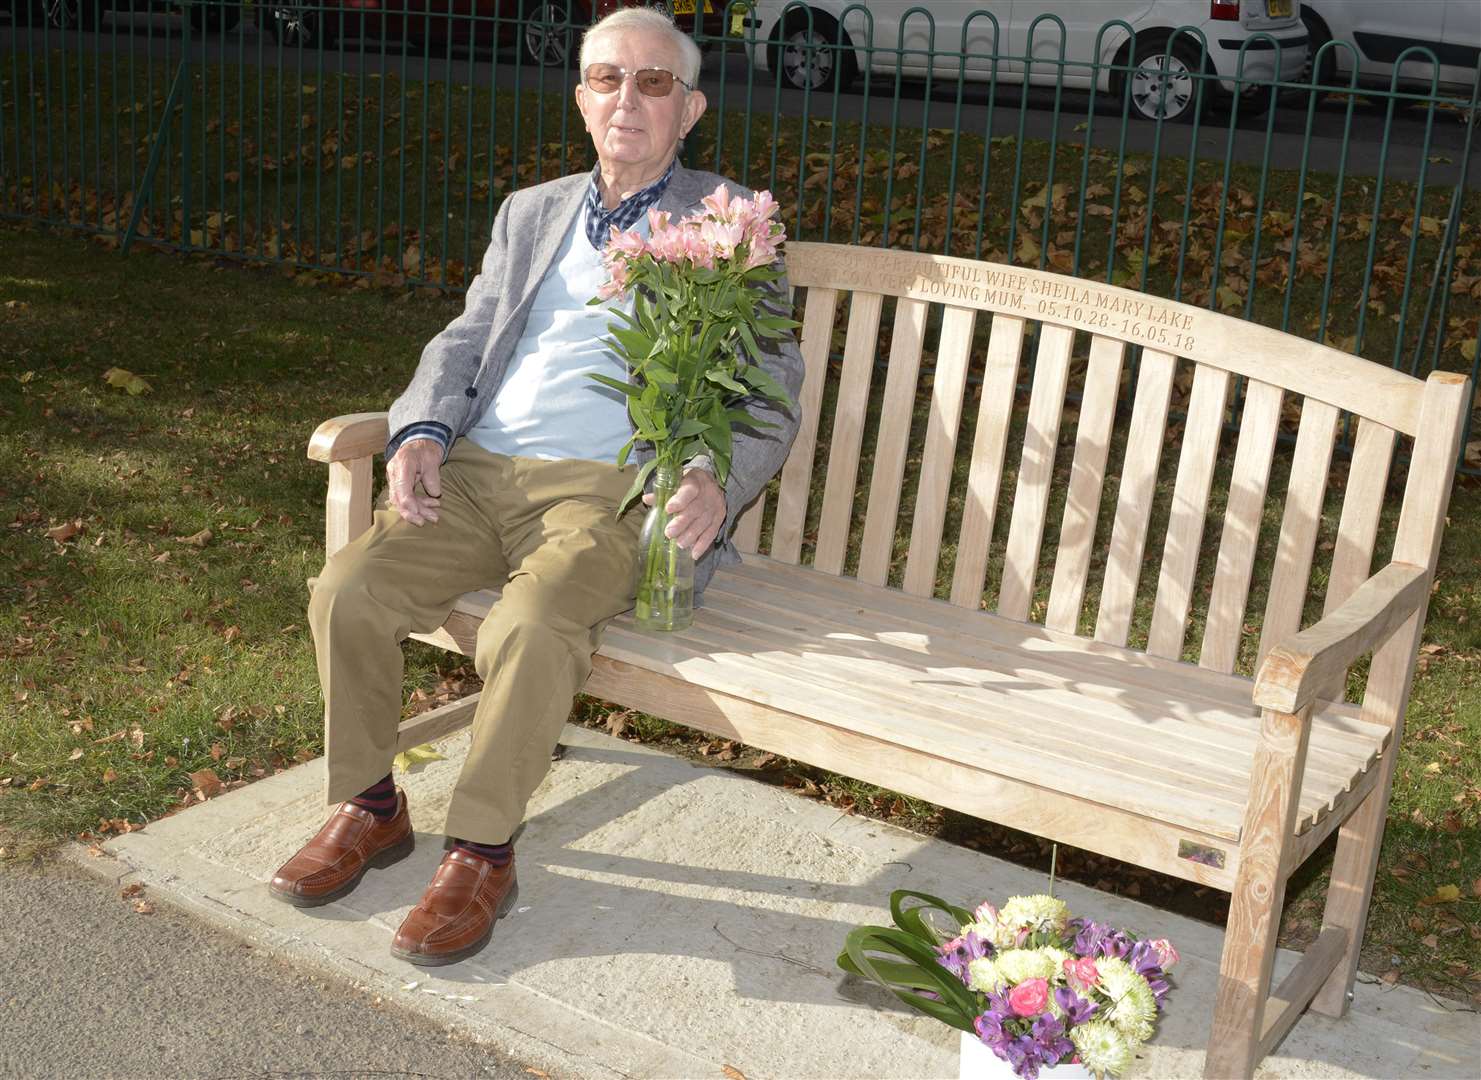 Peter Lake on his wife's memorial bench